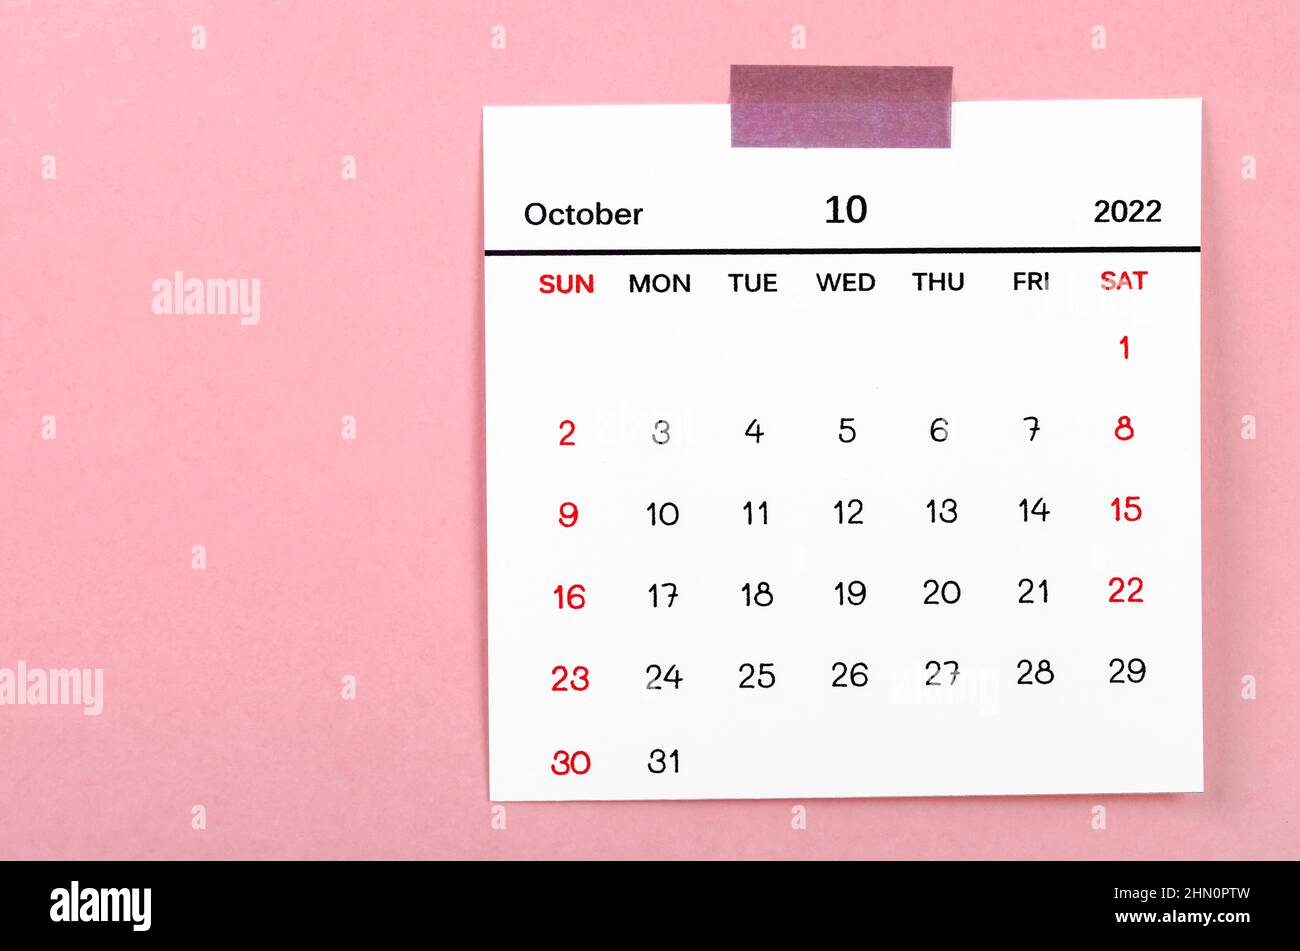 The October 2022 calendar on pink background. Stock Photo